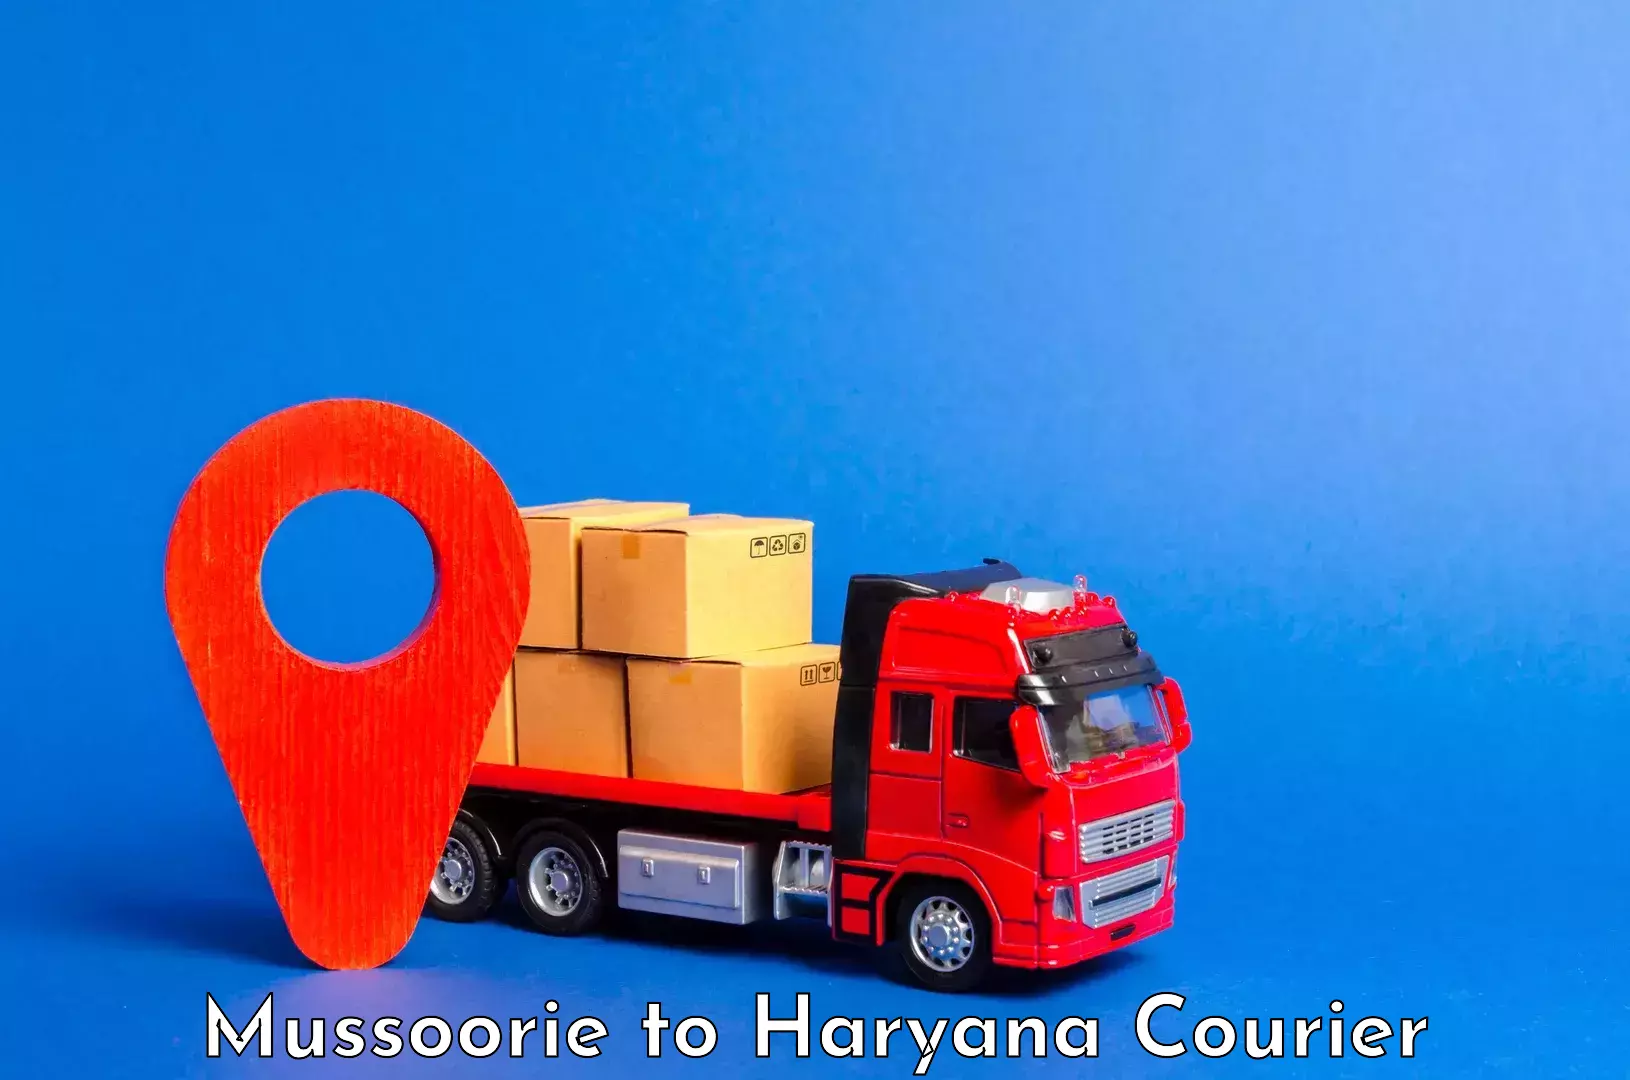 Same day luggage service Mussoorie to Haryana